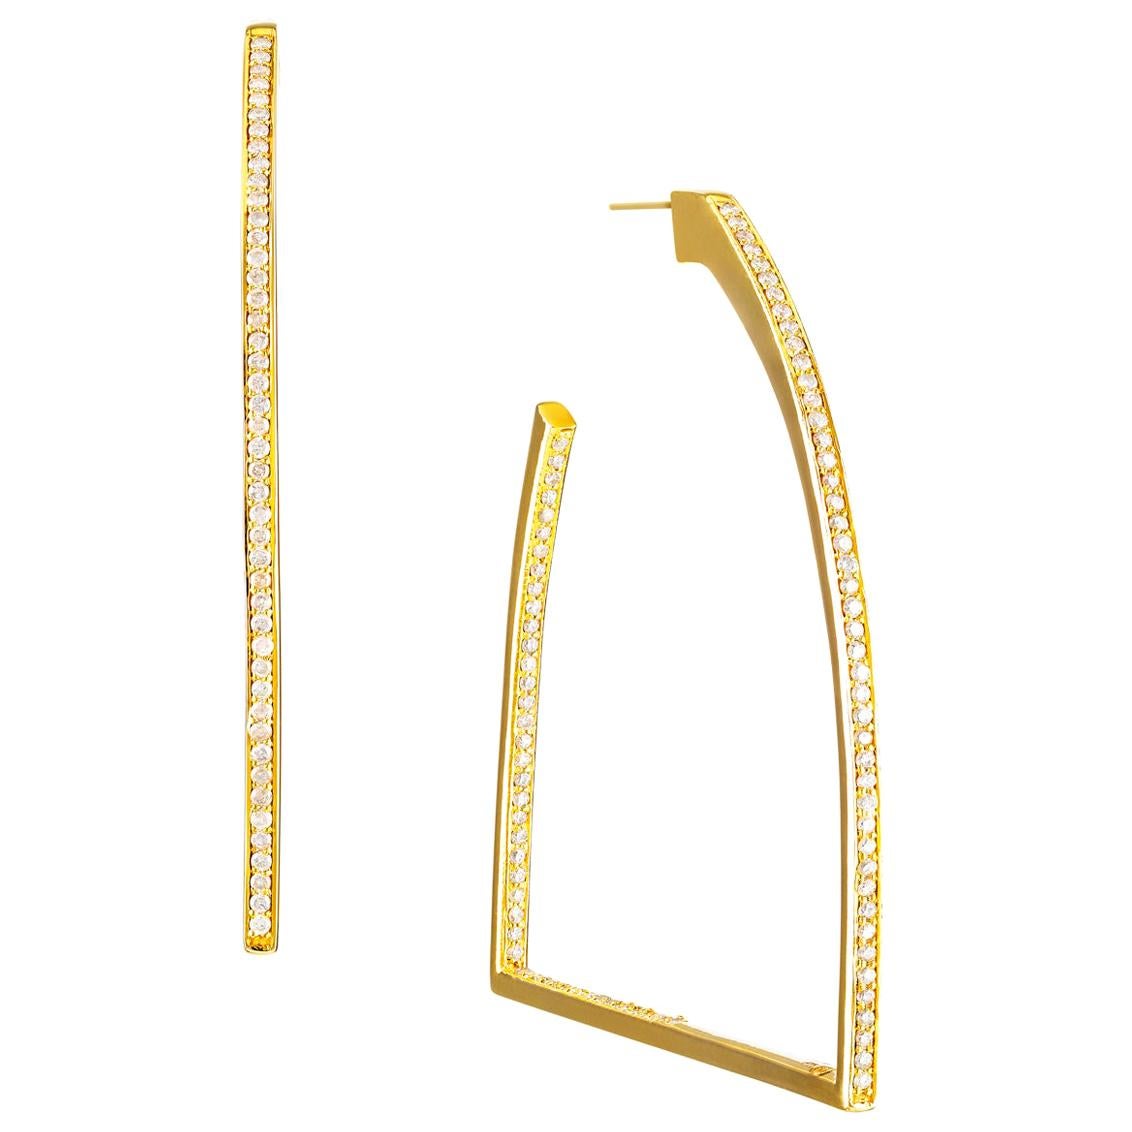 Vincent Peach Equestrian Gold Diamond Stirrup Hoop Earrings For Sale